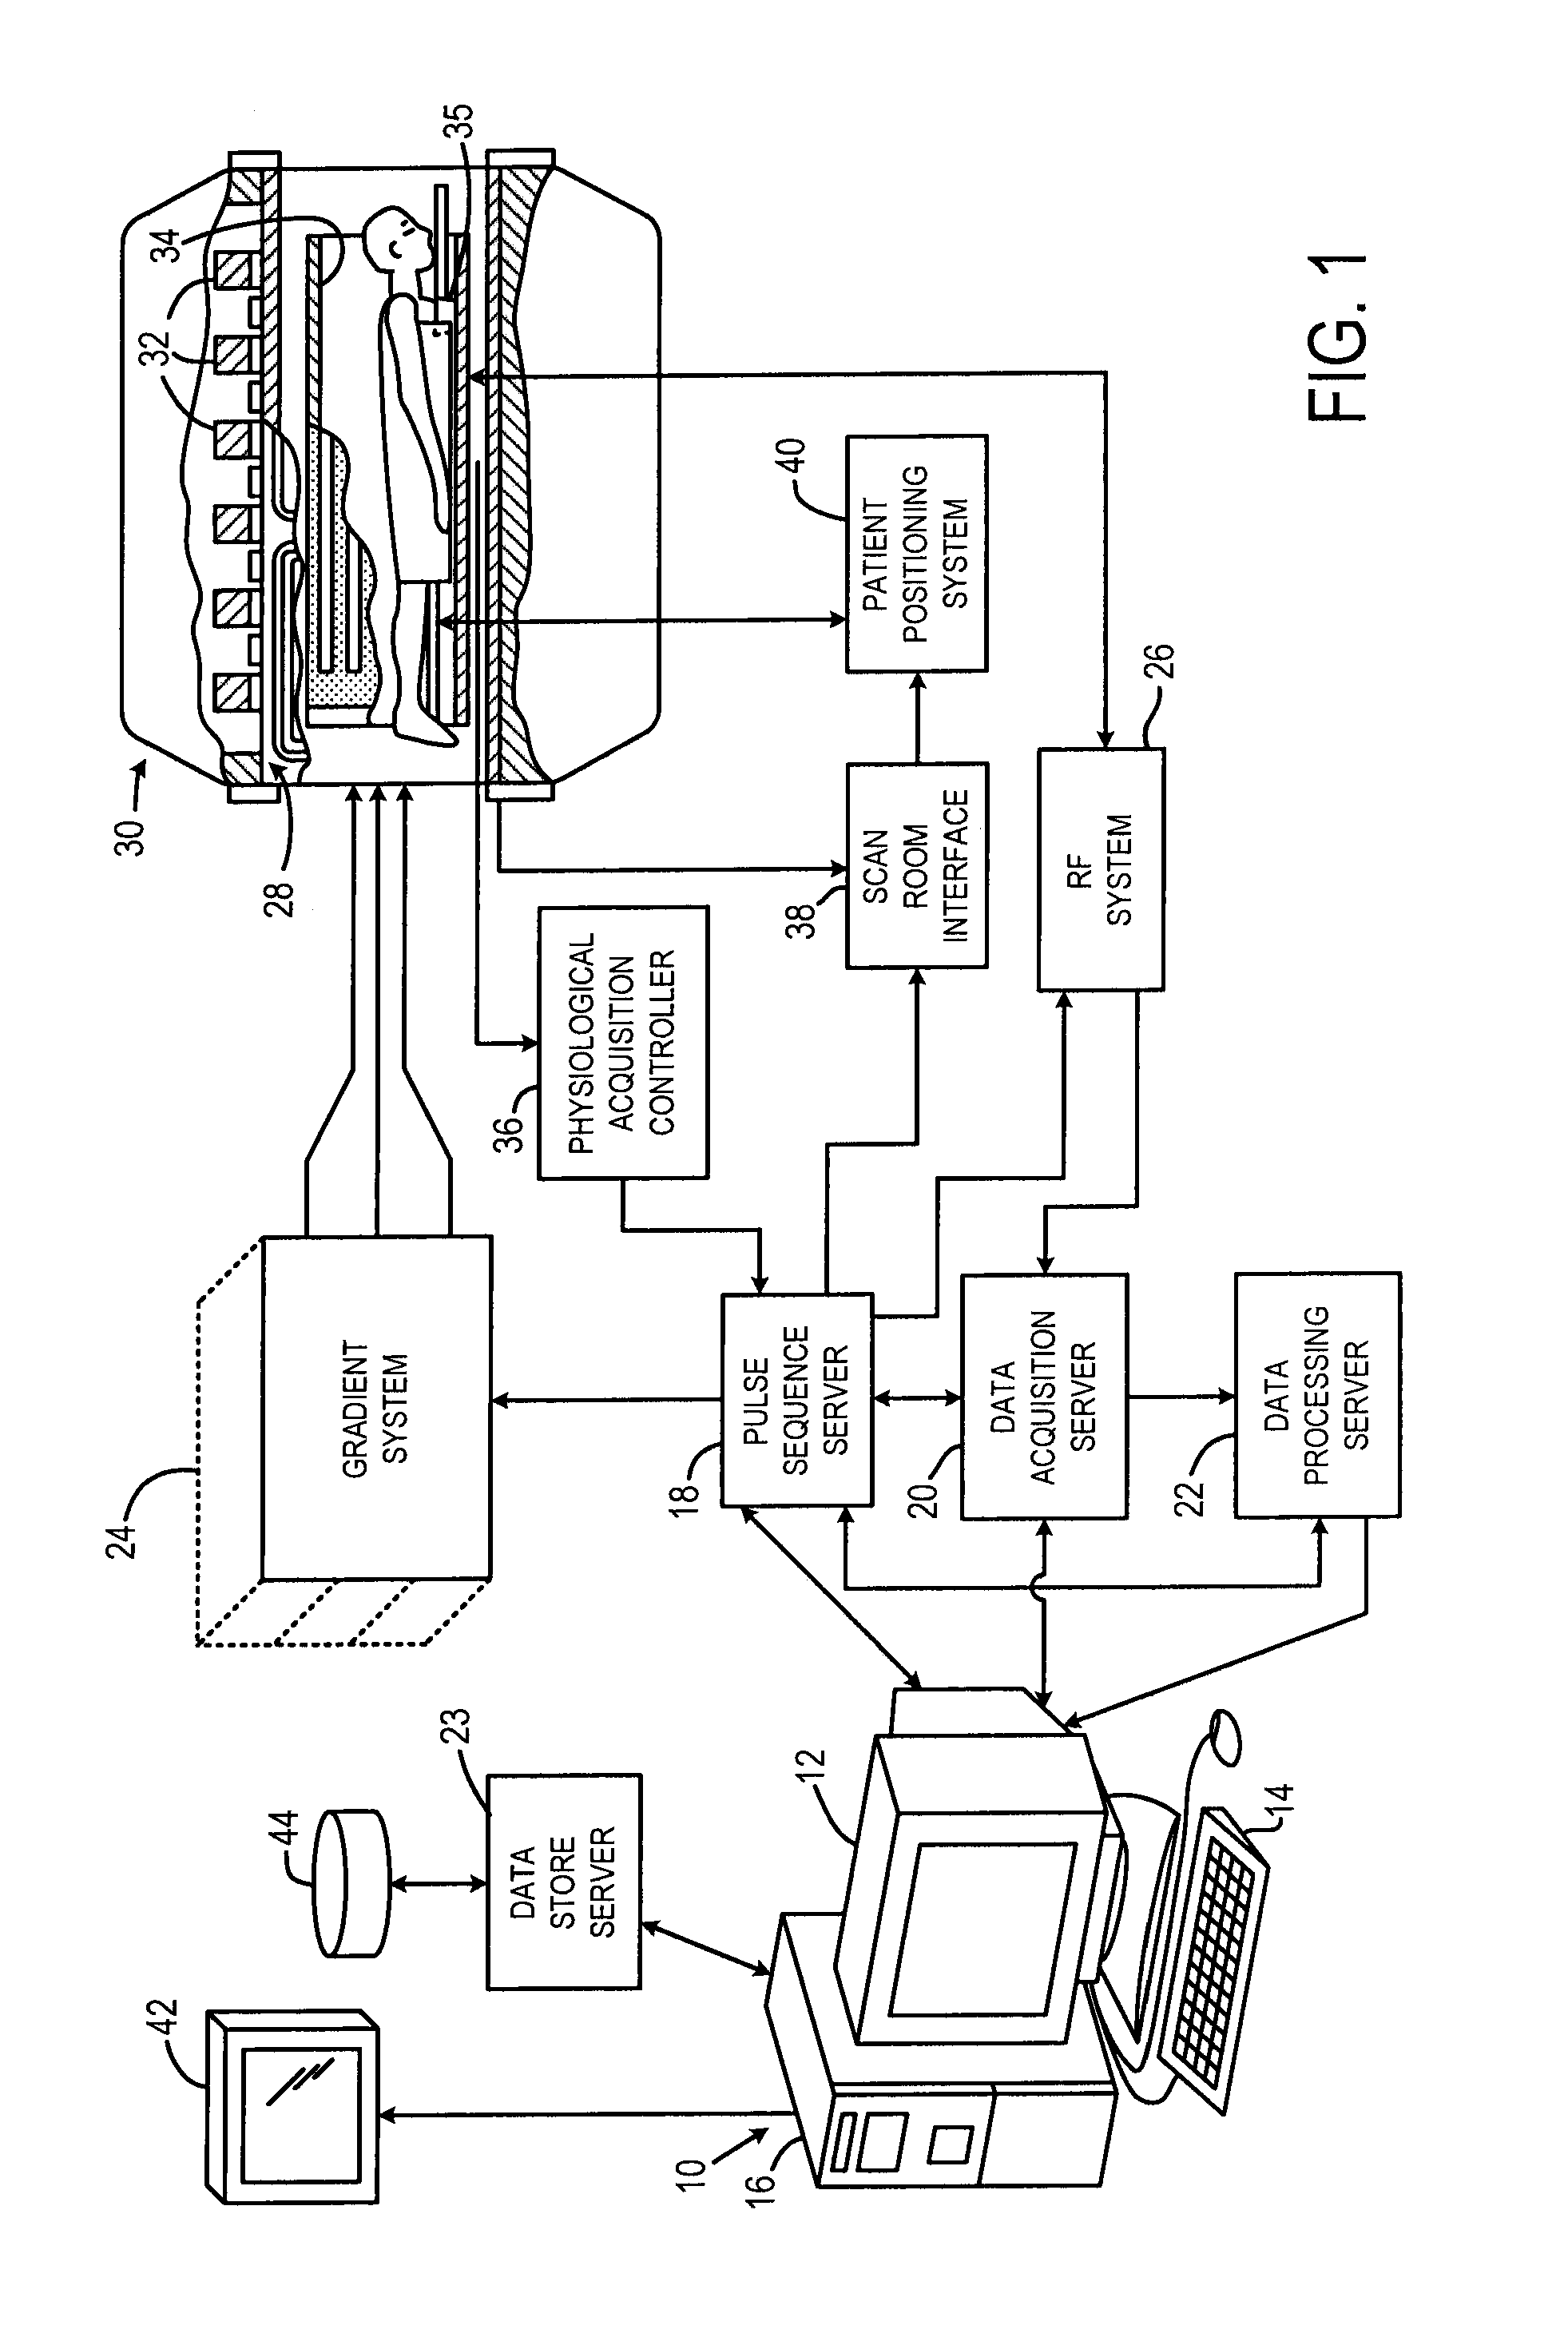 Local MRI breast coil and method of use